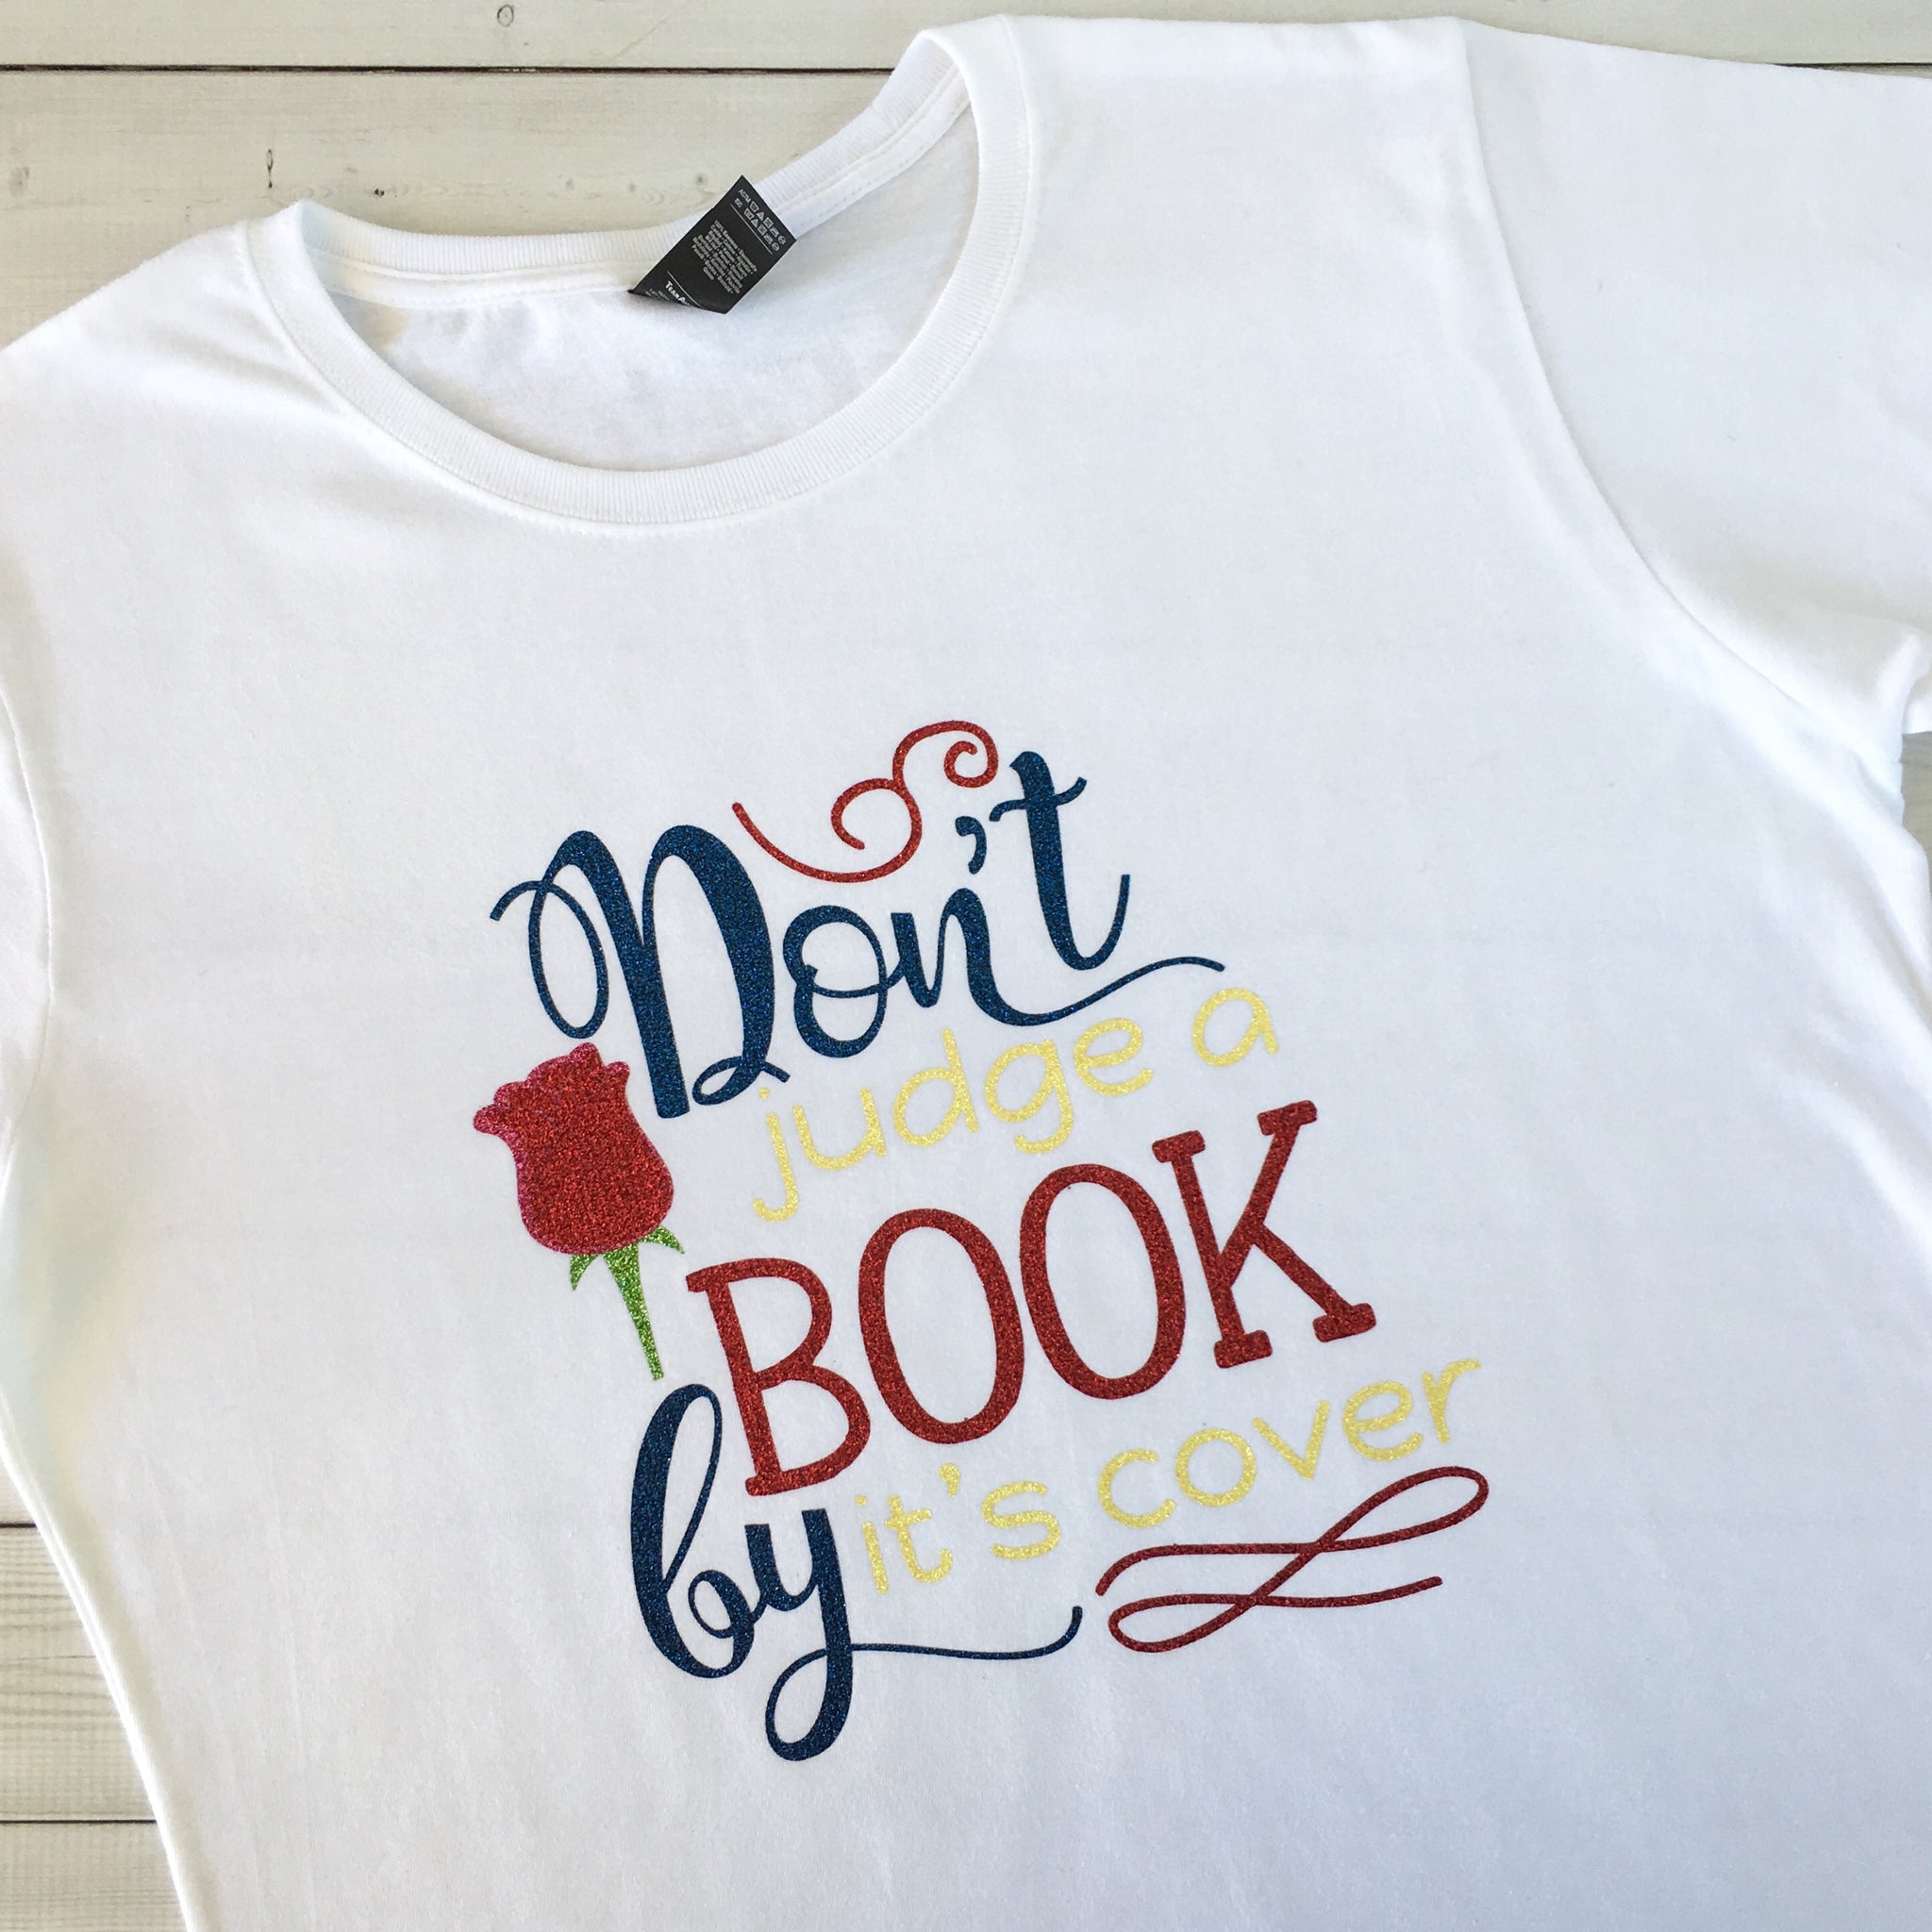 "Don't Judge a Book by It's Cover" Glitter Women's Shirt ONLY